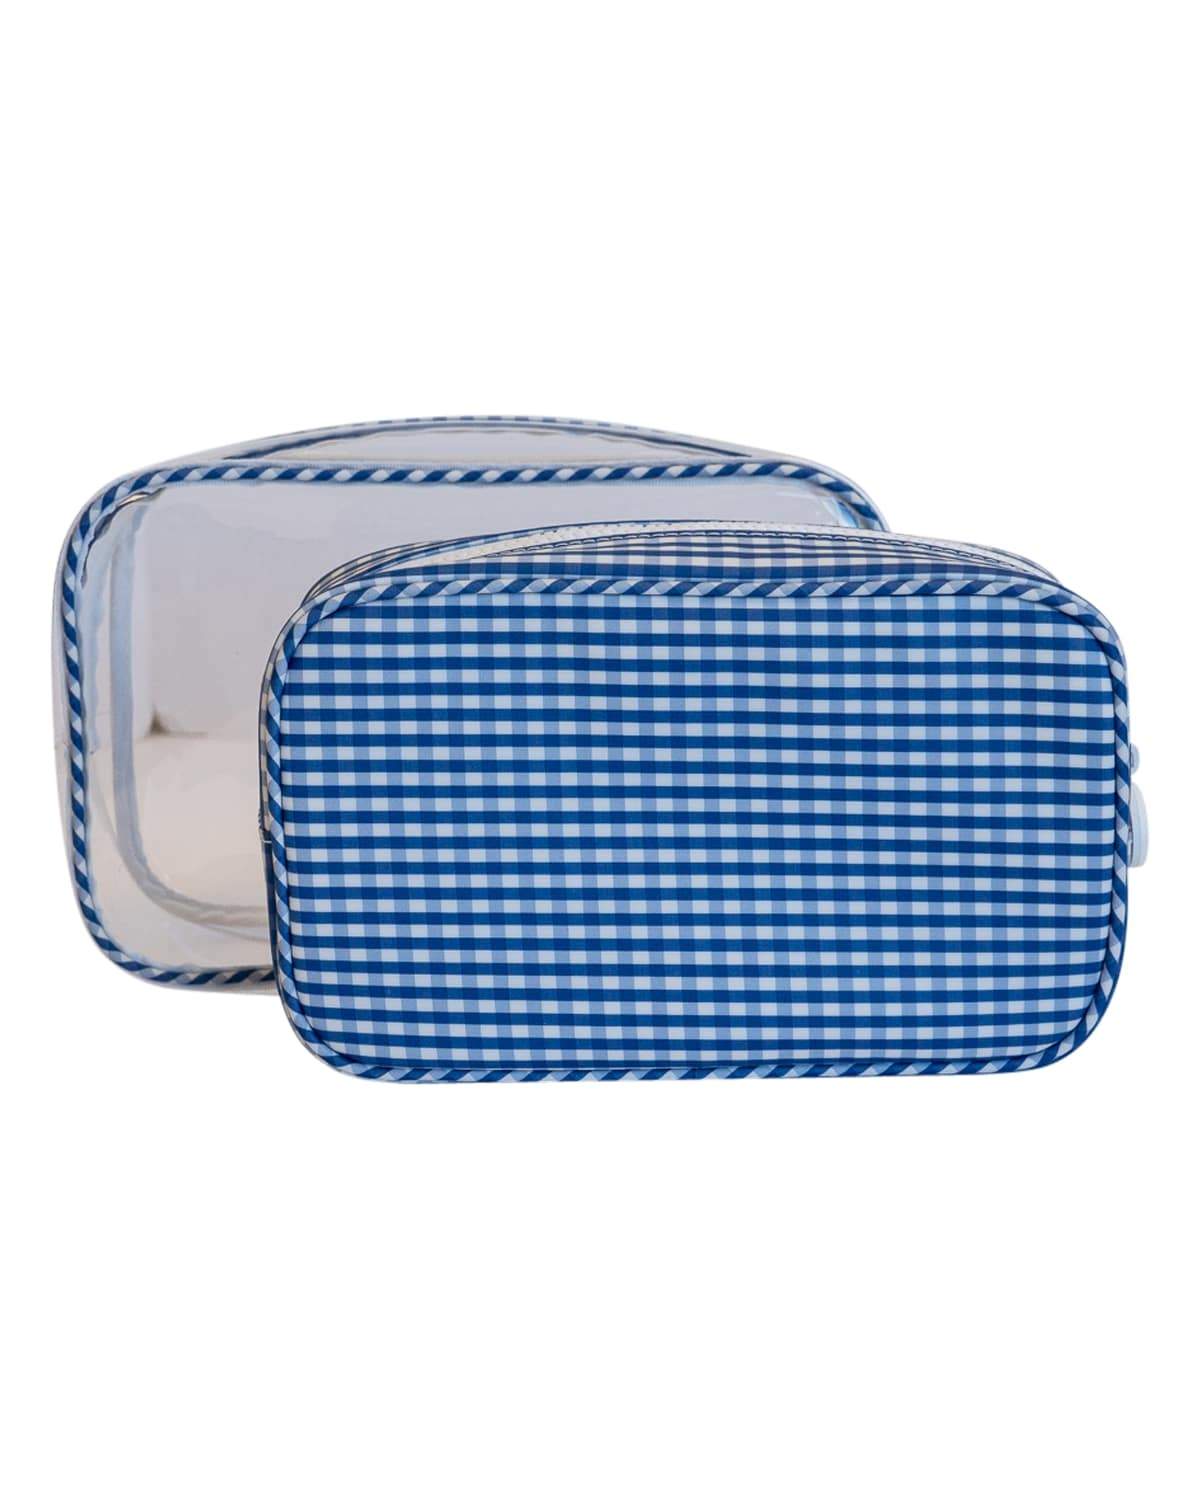 Duo Gingham Travel Bag Set - more colors available - The Preppy Bunny